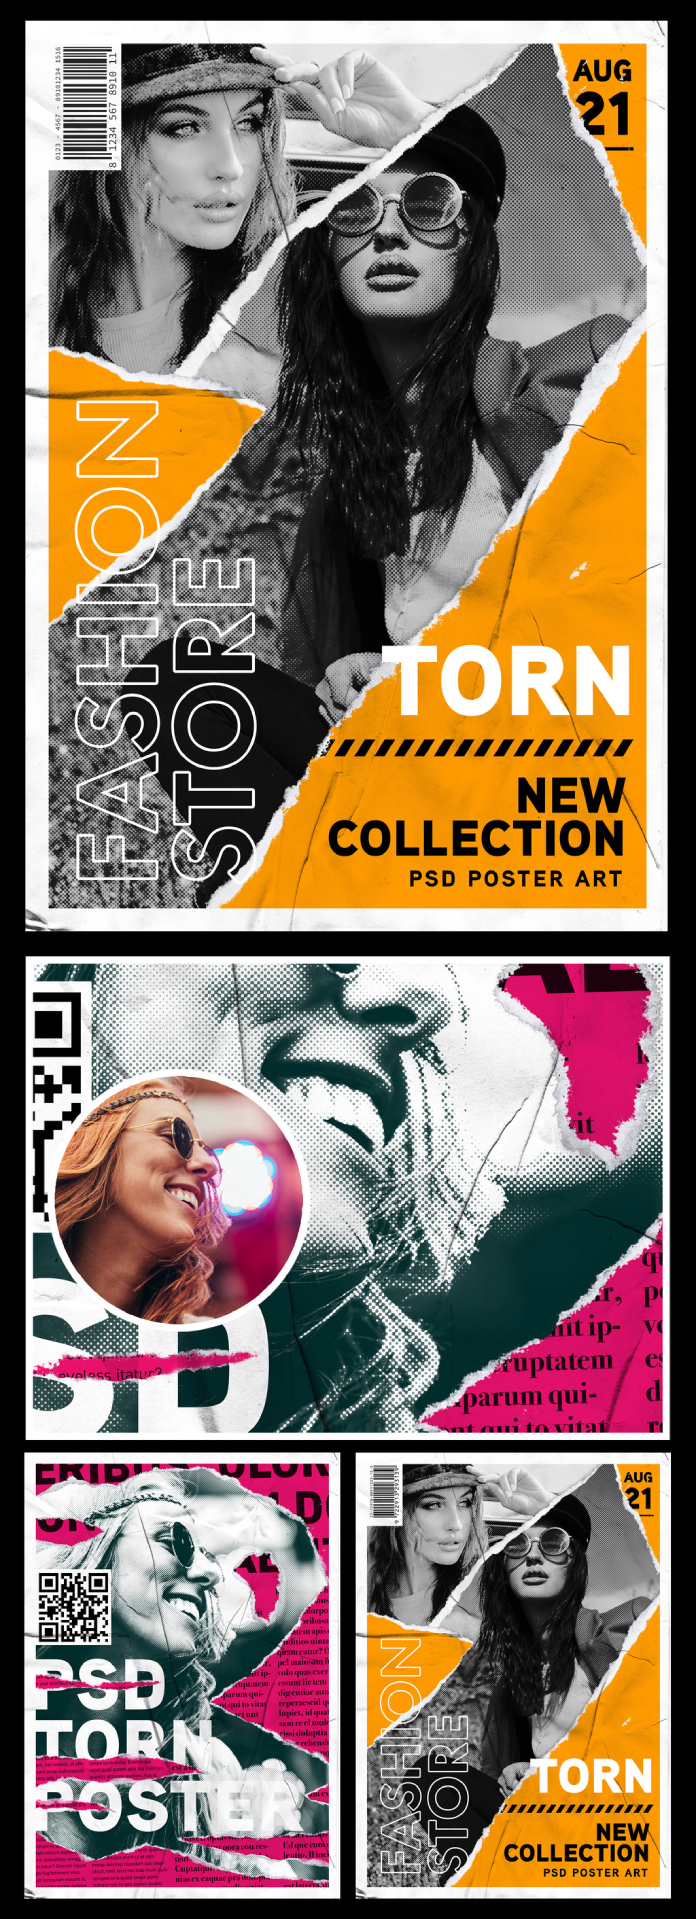 Torn Poster Design Photoshop Template